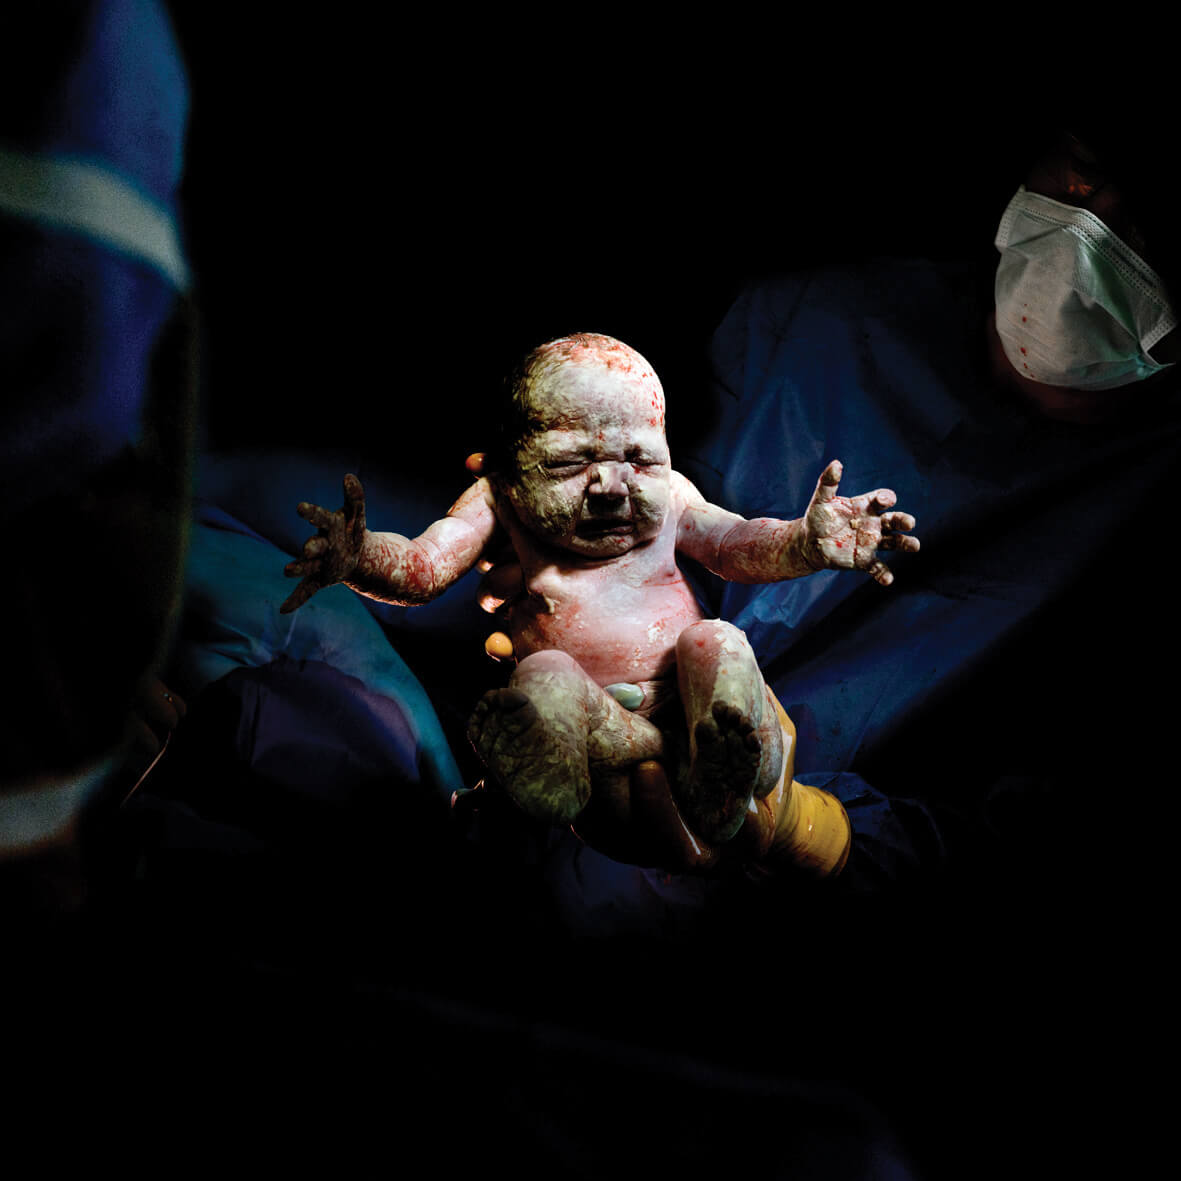 Photographer Christian Berthelot captures babies when they are born